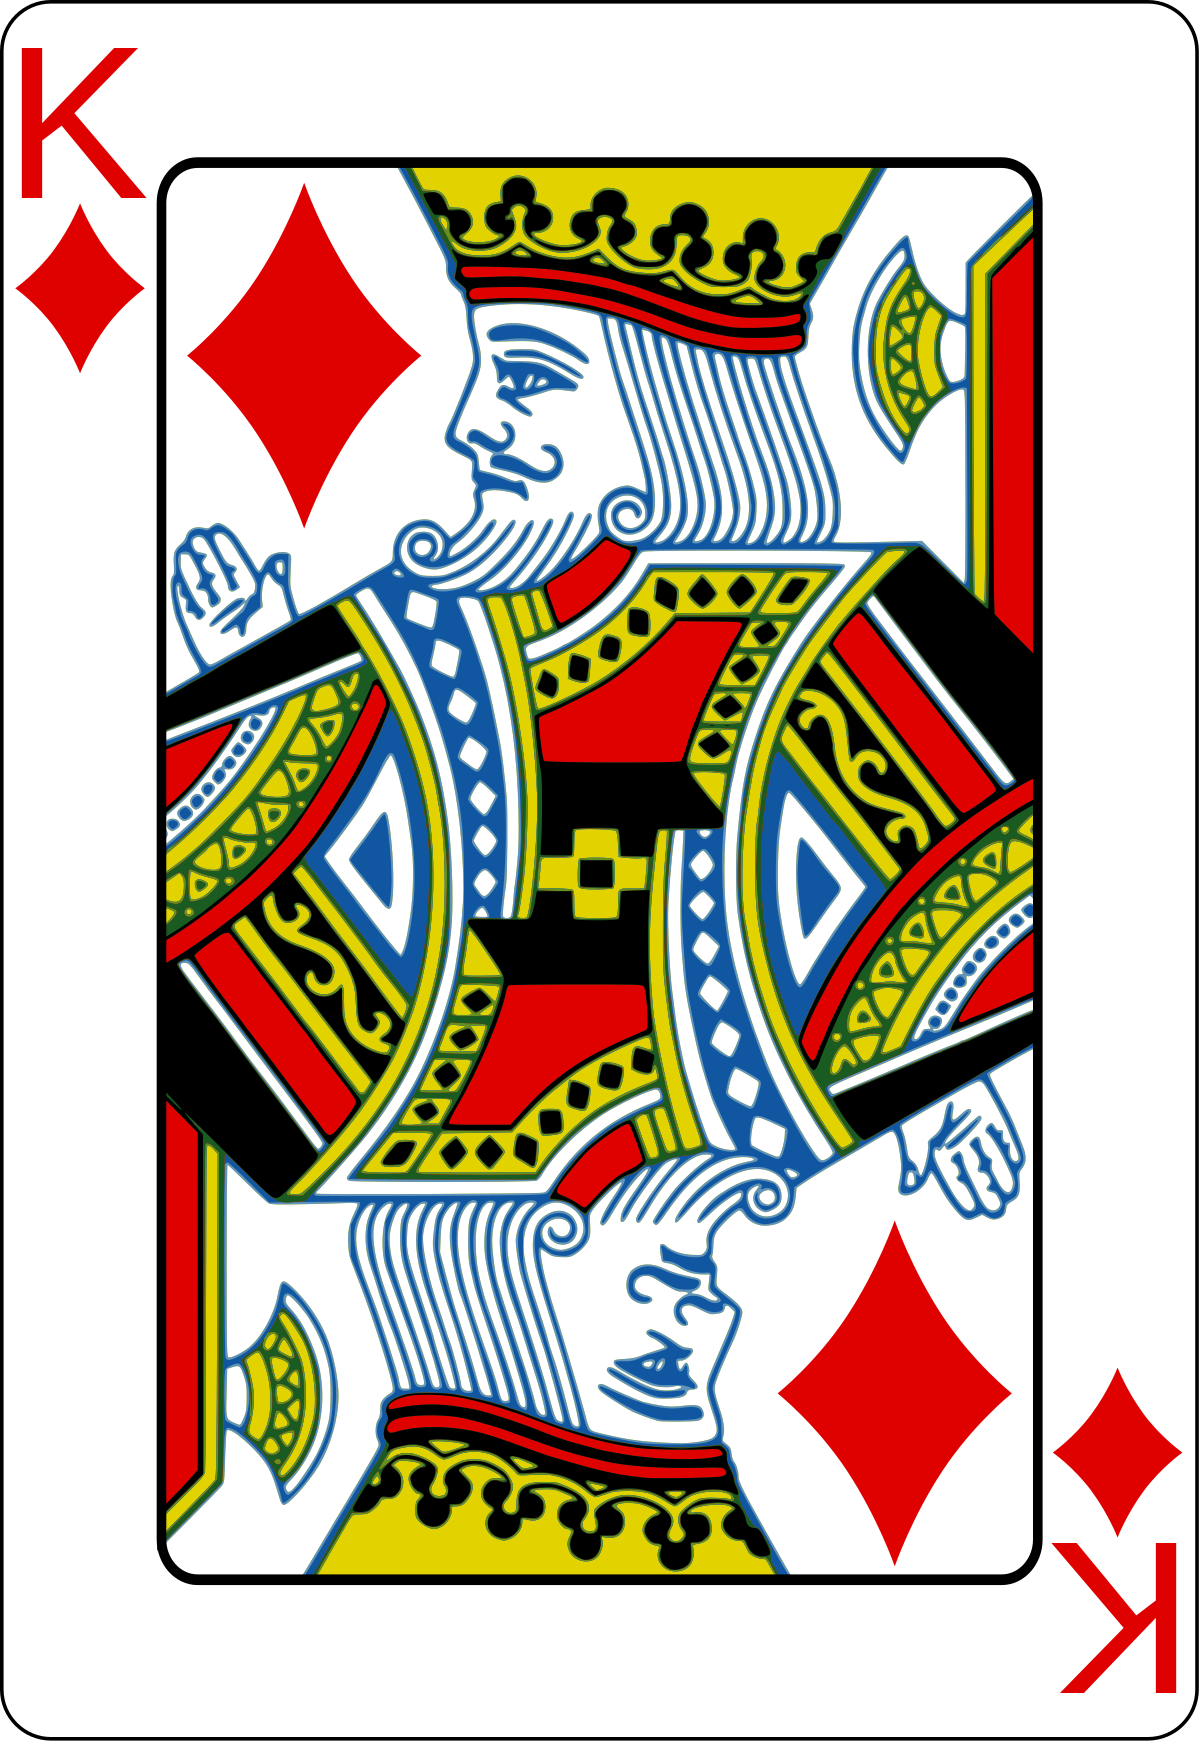 Download File:King of diamonds2.svg - Wikimedia Commons